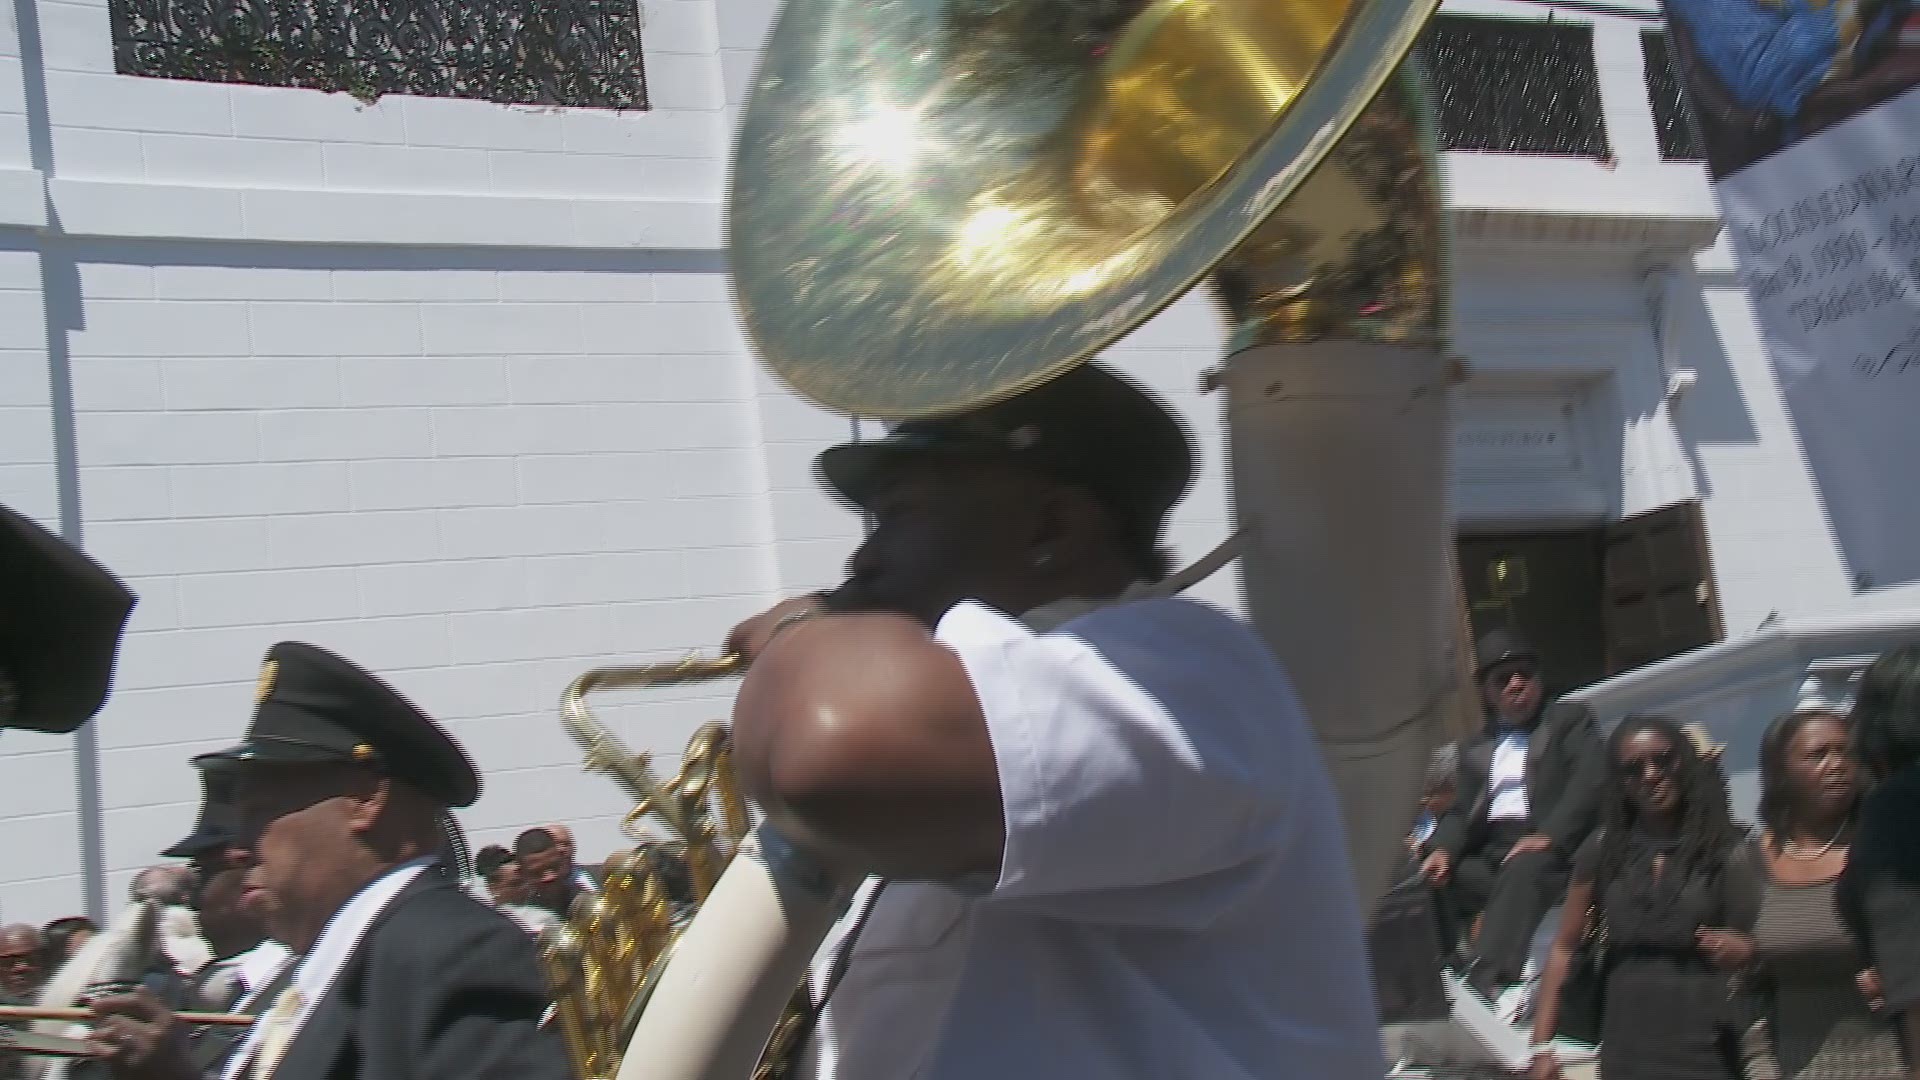 Jazz funeral procession for Lolis Edward Elie as it left St. Augustine Church in Treme on Saturday.